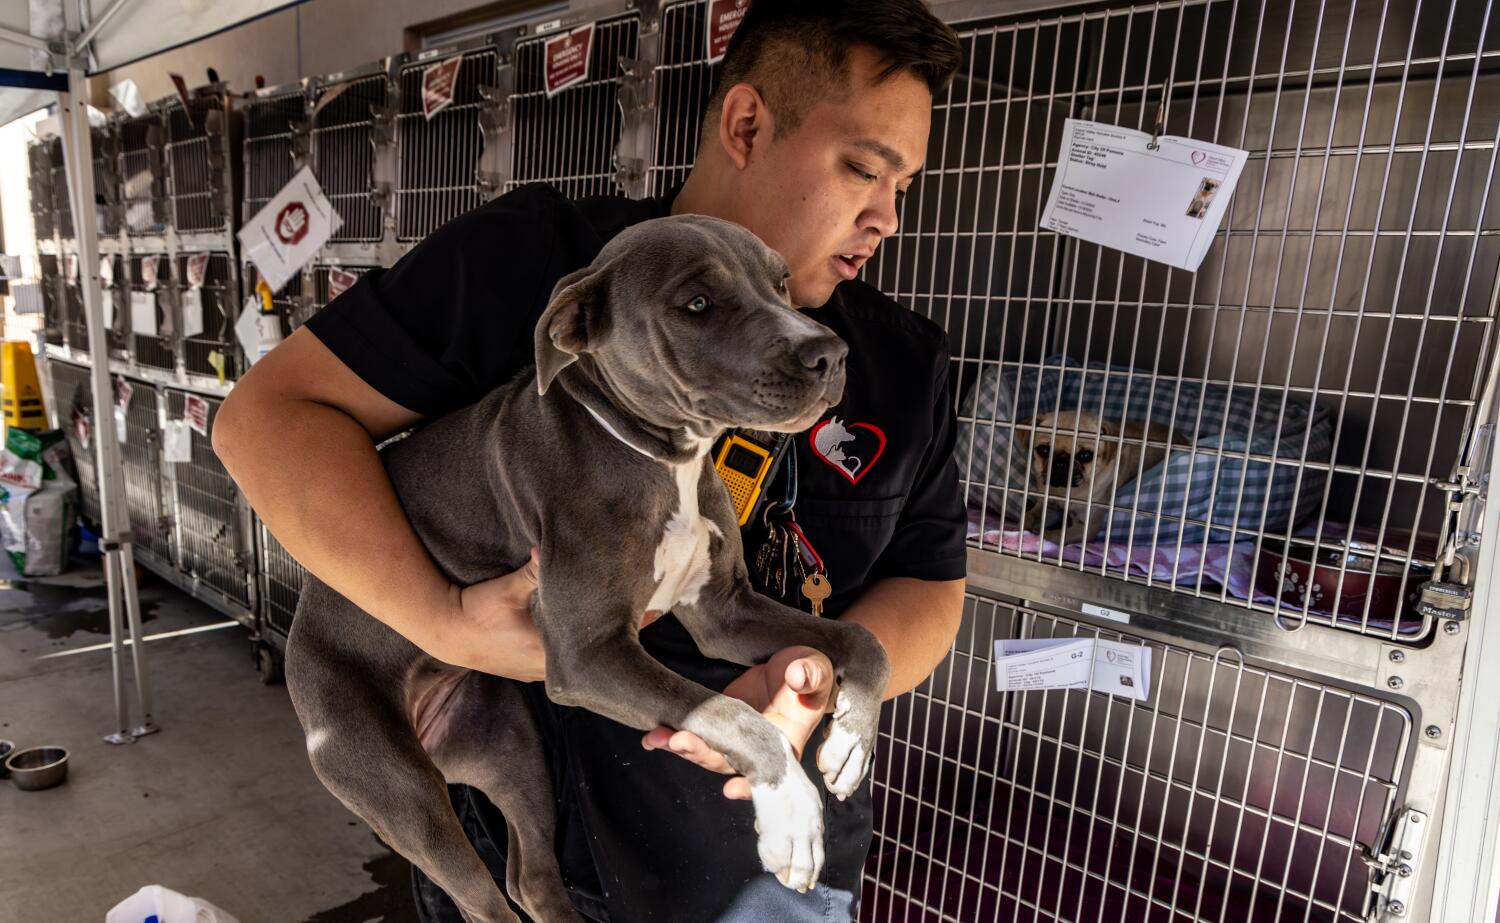 'We're inundated': Animal shelters across the U.S. are overflowing